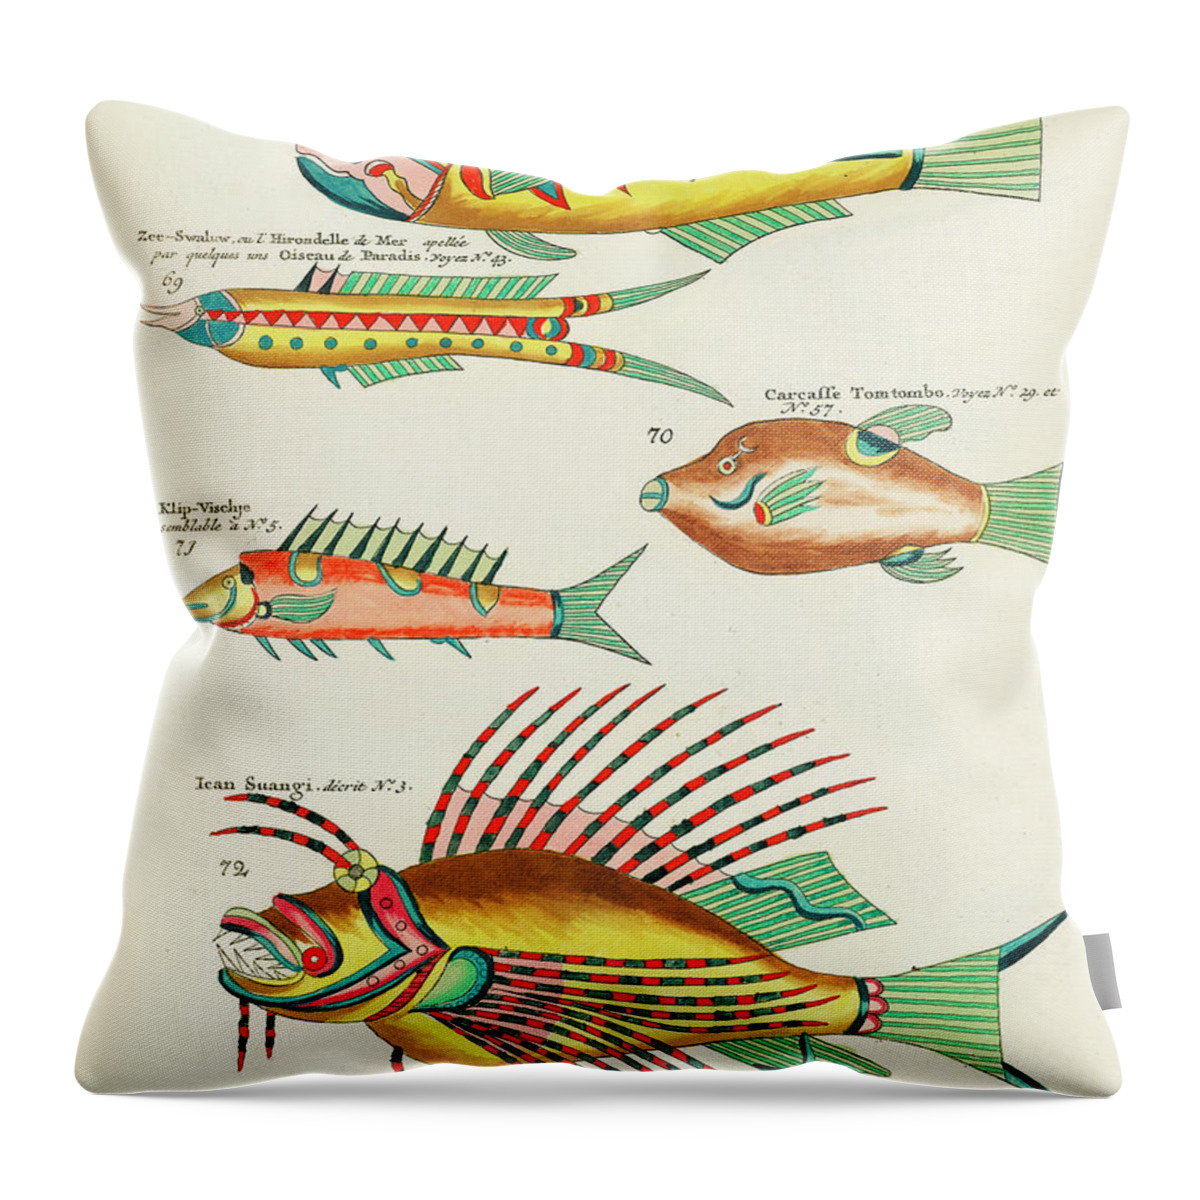 Fish Throw Pillow featuring the digital art Vintage, Whimsical Fish and Marine Life Illustration by Louis Renard - Ican Suangi, Pots Kop by Louis Renard